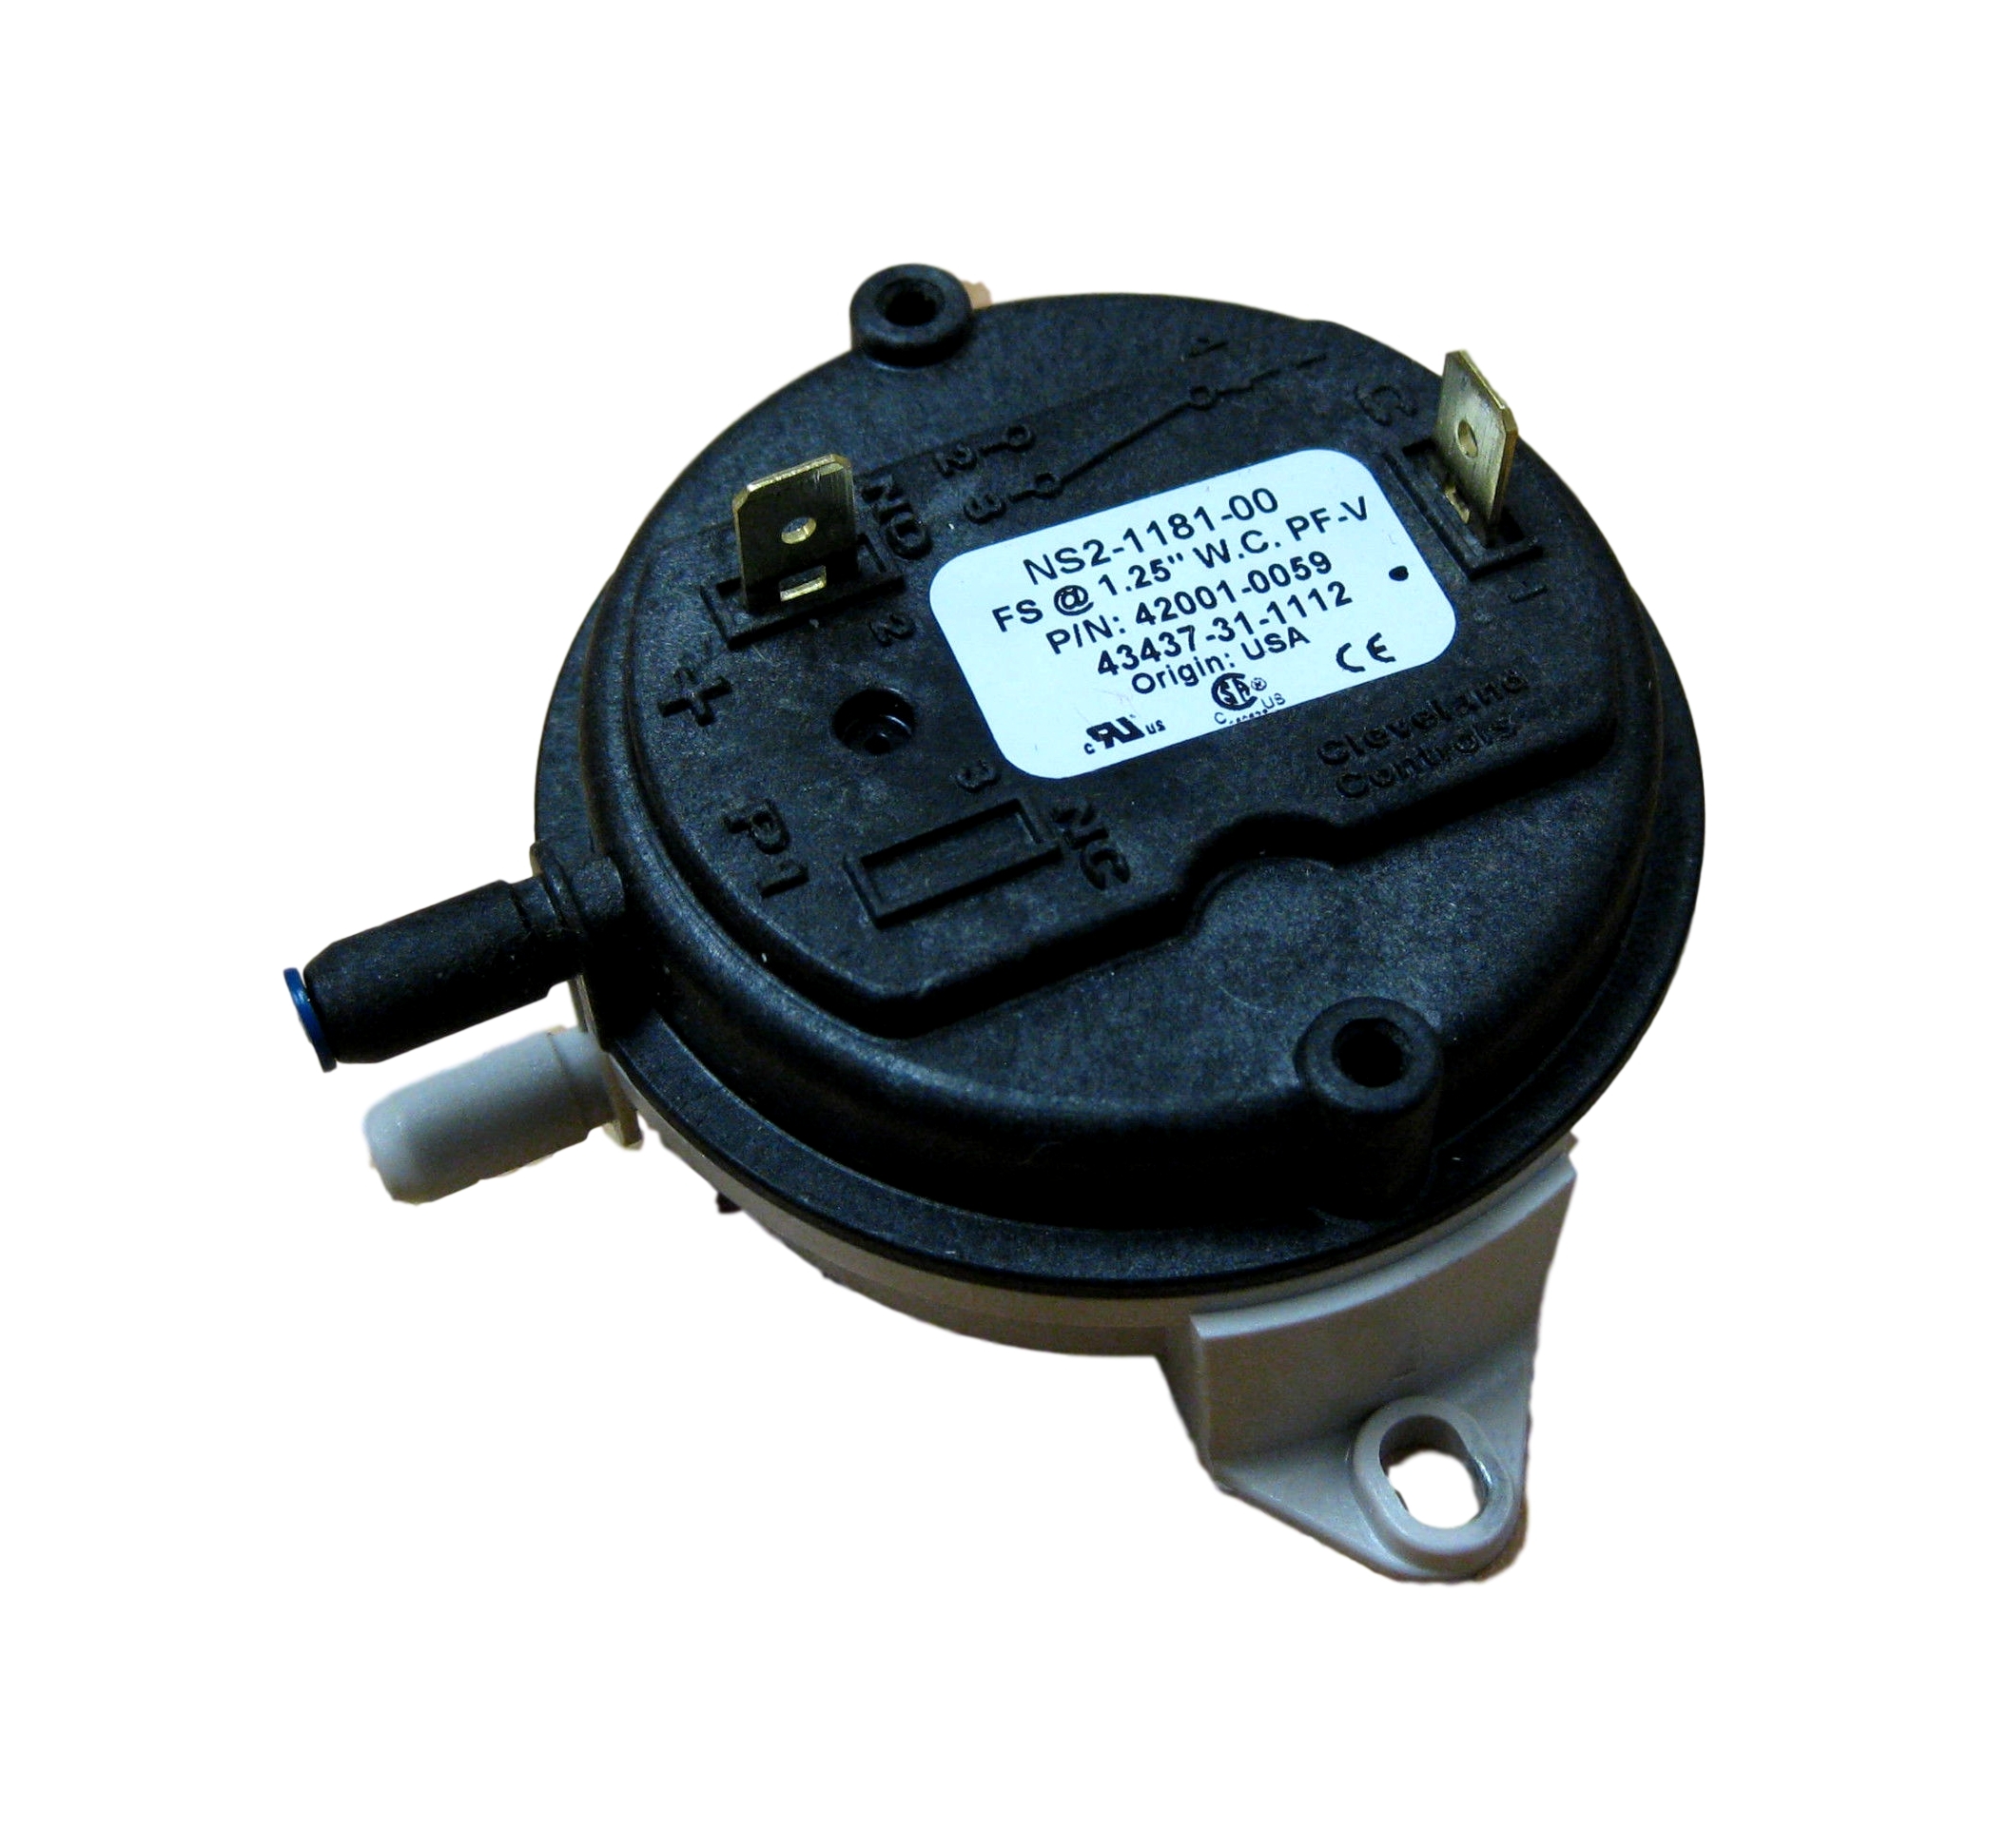 Pentair 42001-0059 Air Flow Switch - image 4 of 4